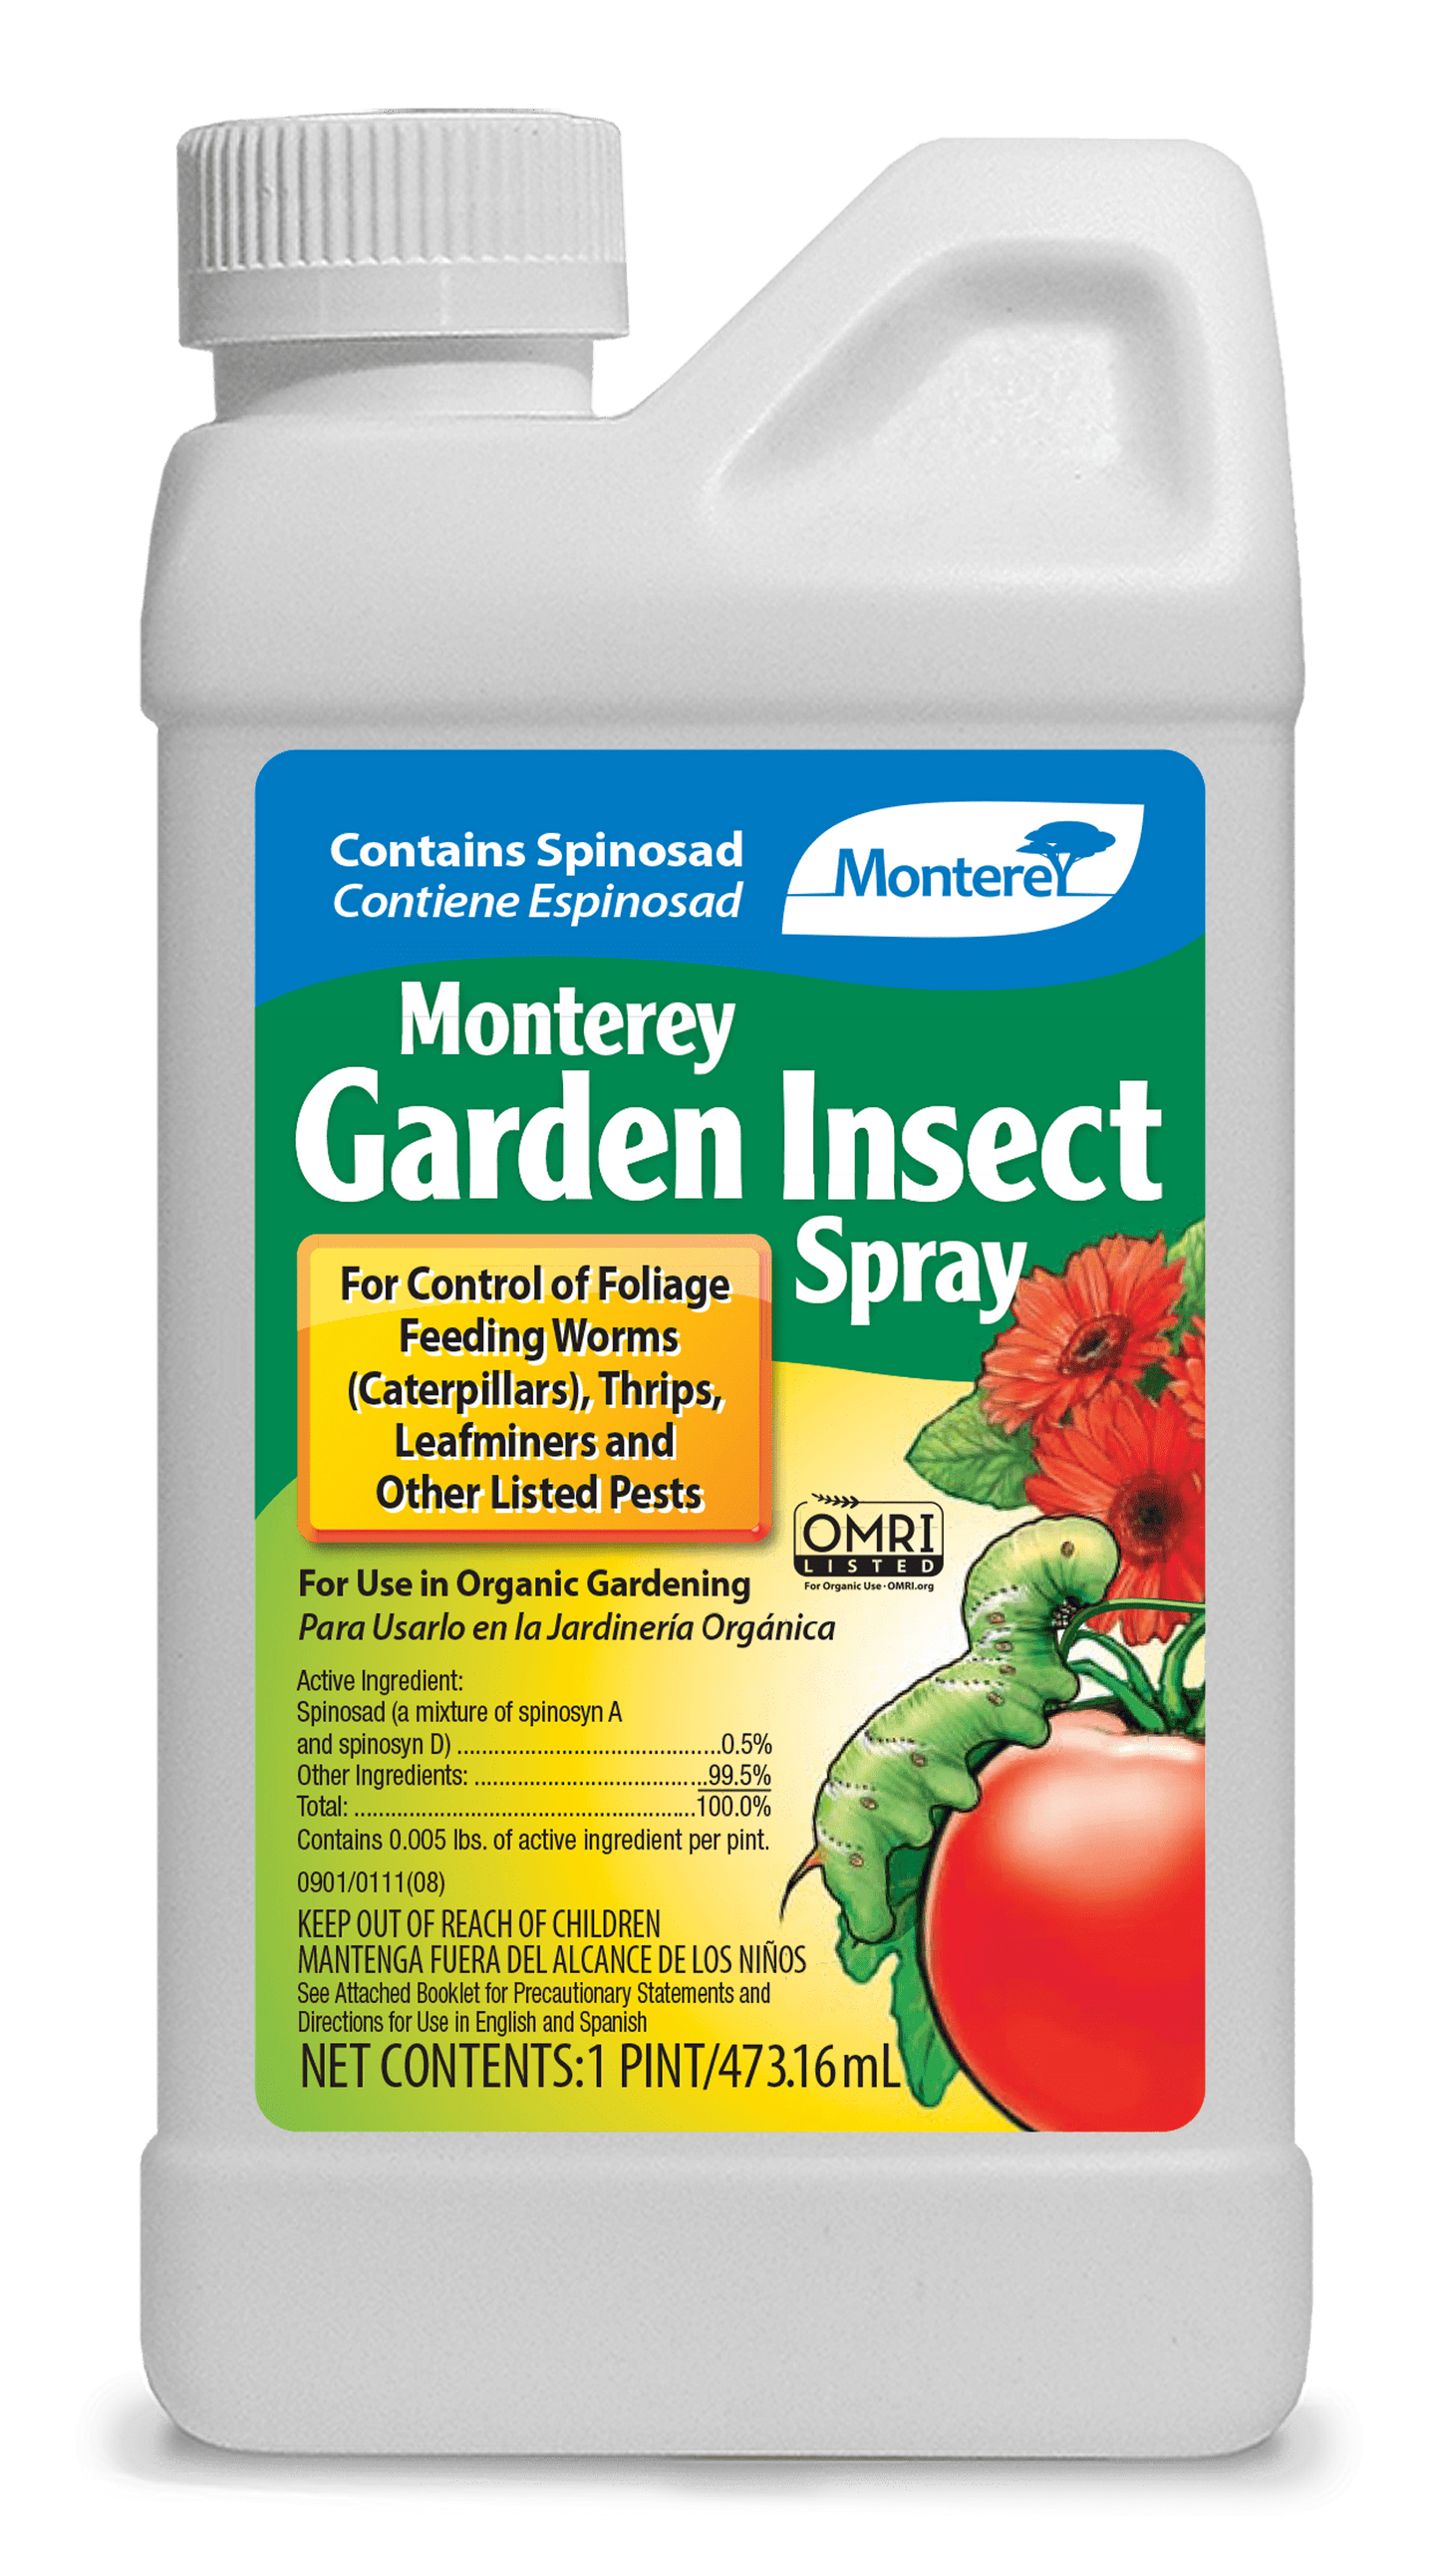 Monterey Garden Insect Spray (Spinosad) - Concentrate